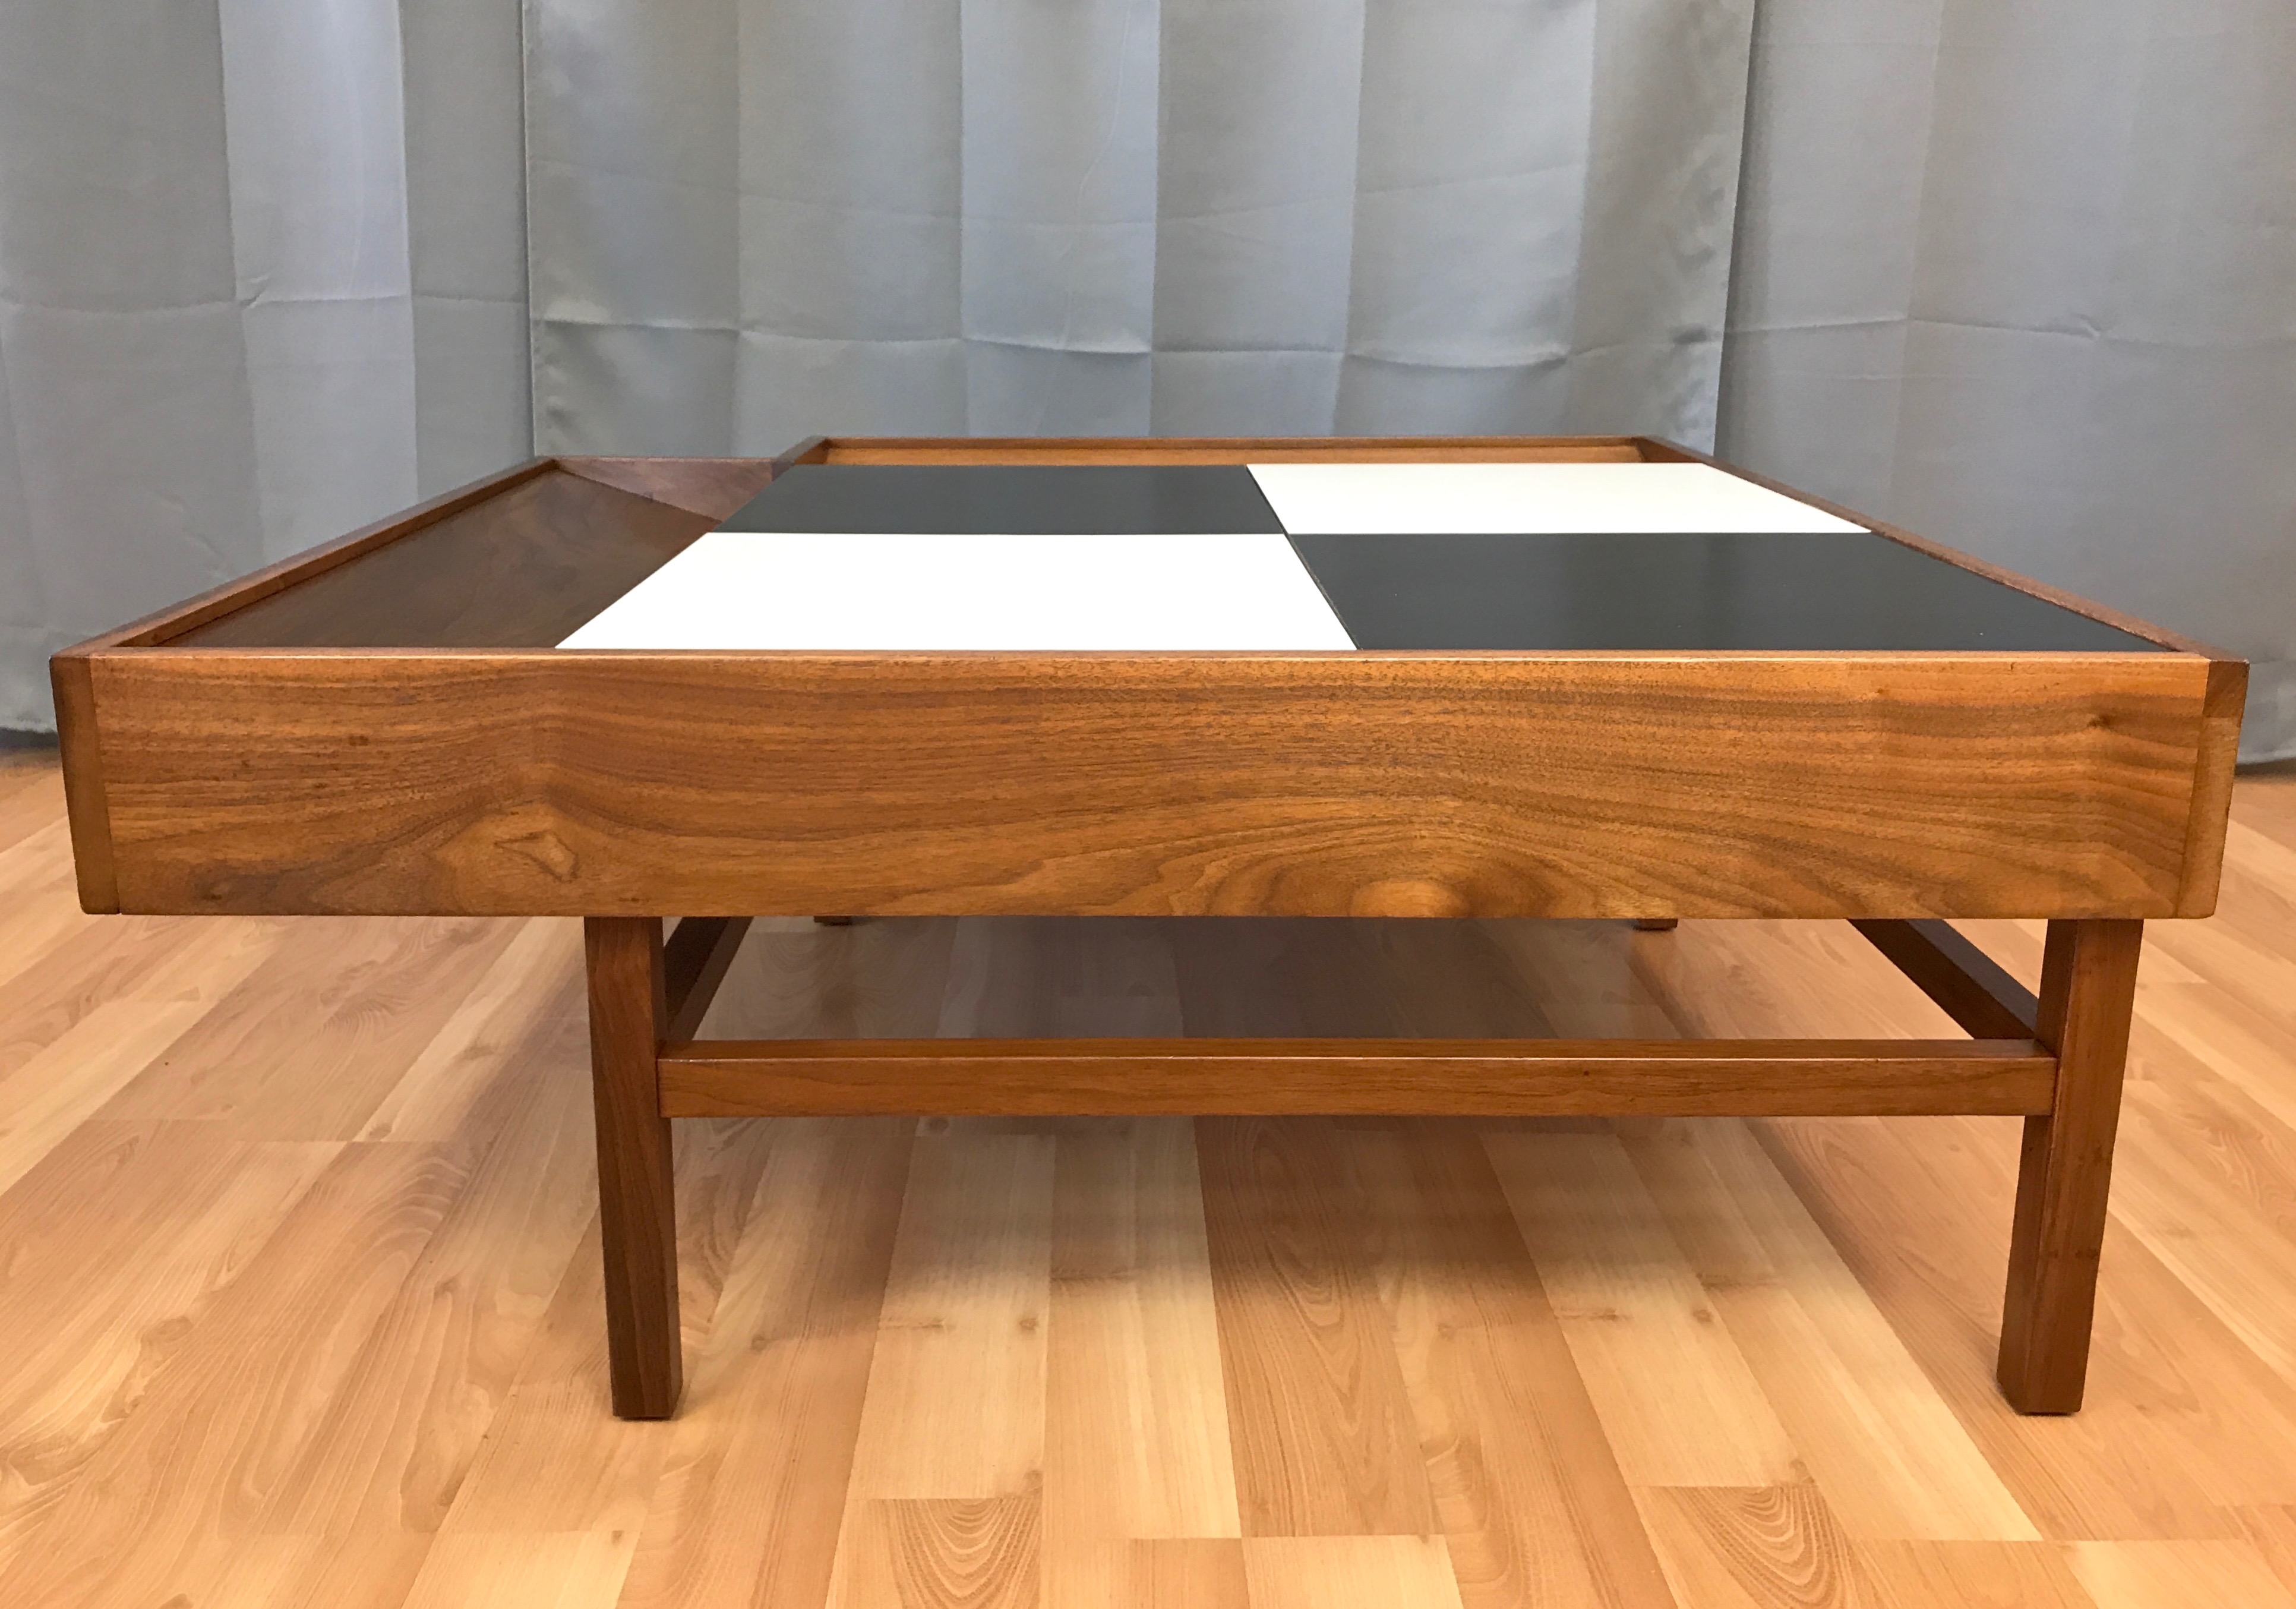 john keal for brown saltman checkered top walnut coffee table past end standard lamp height small mid century marble metal inch tall tables furniture arrangement living room